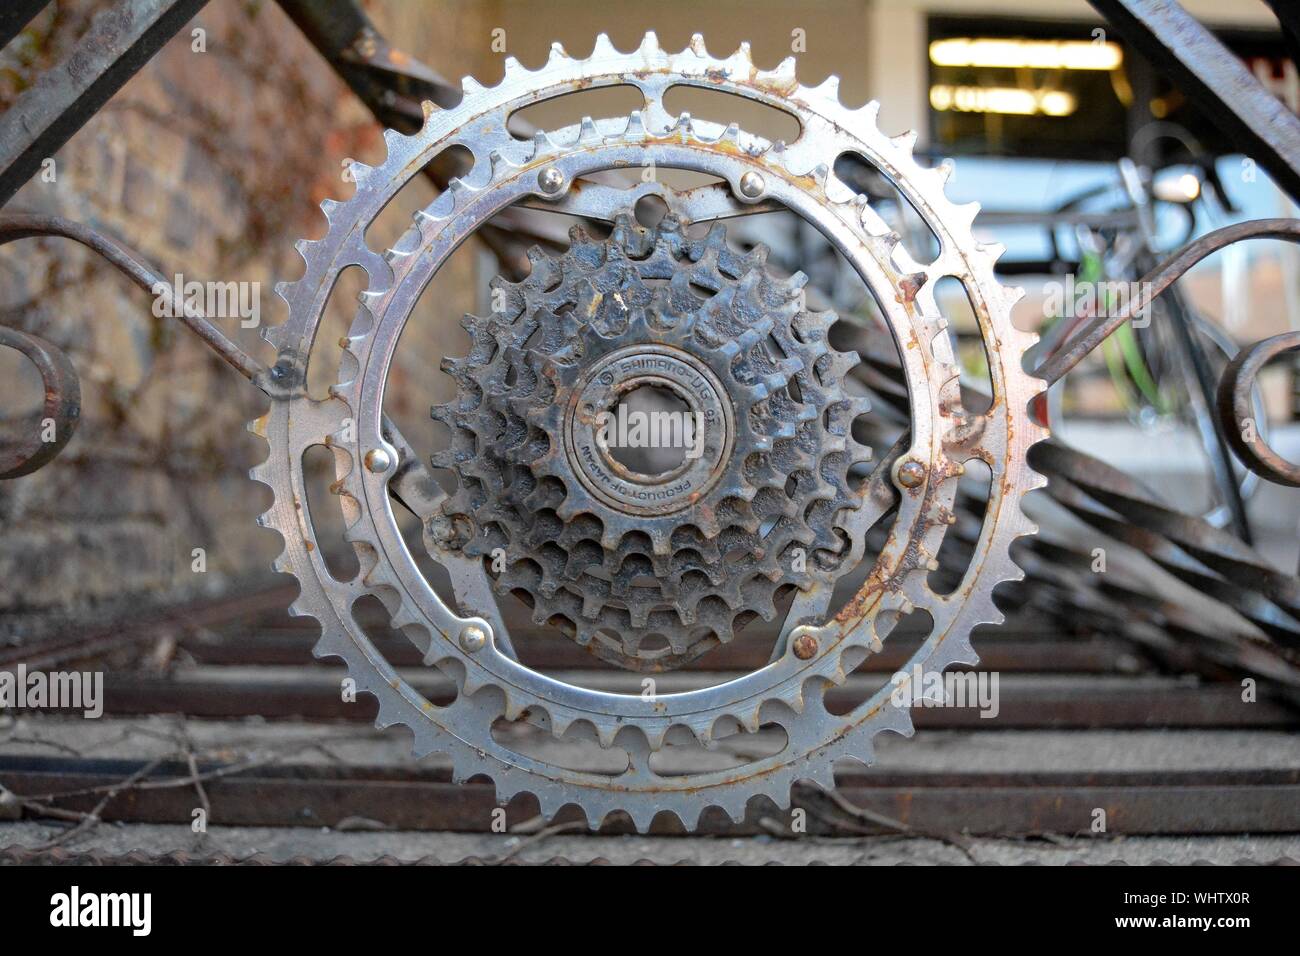 Close-up Of Old Bicycle Gears Stock Photo